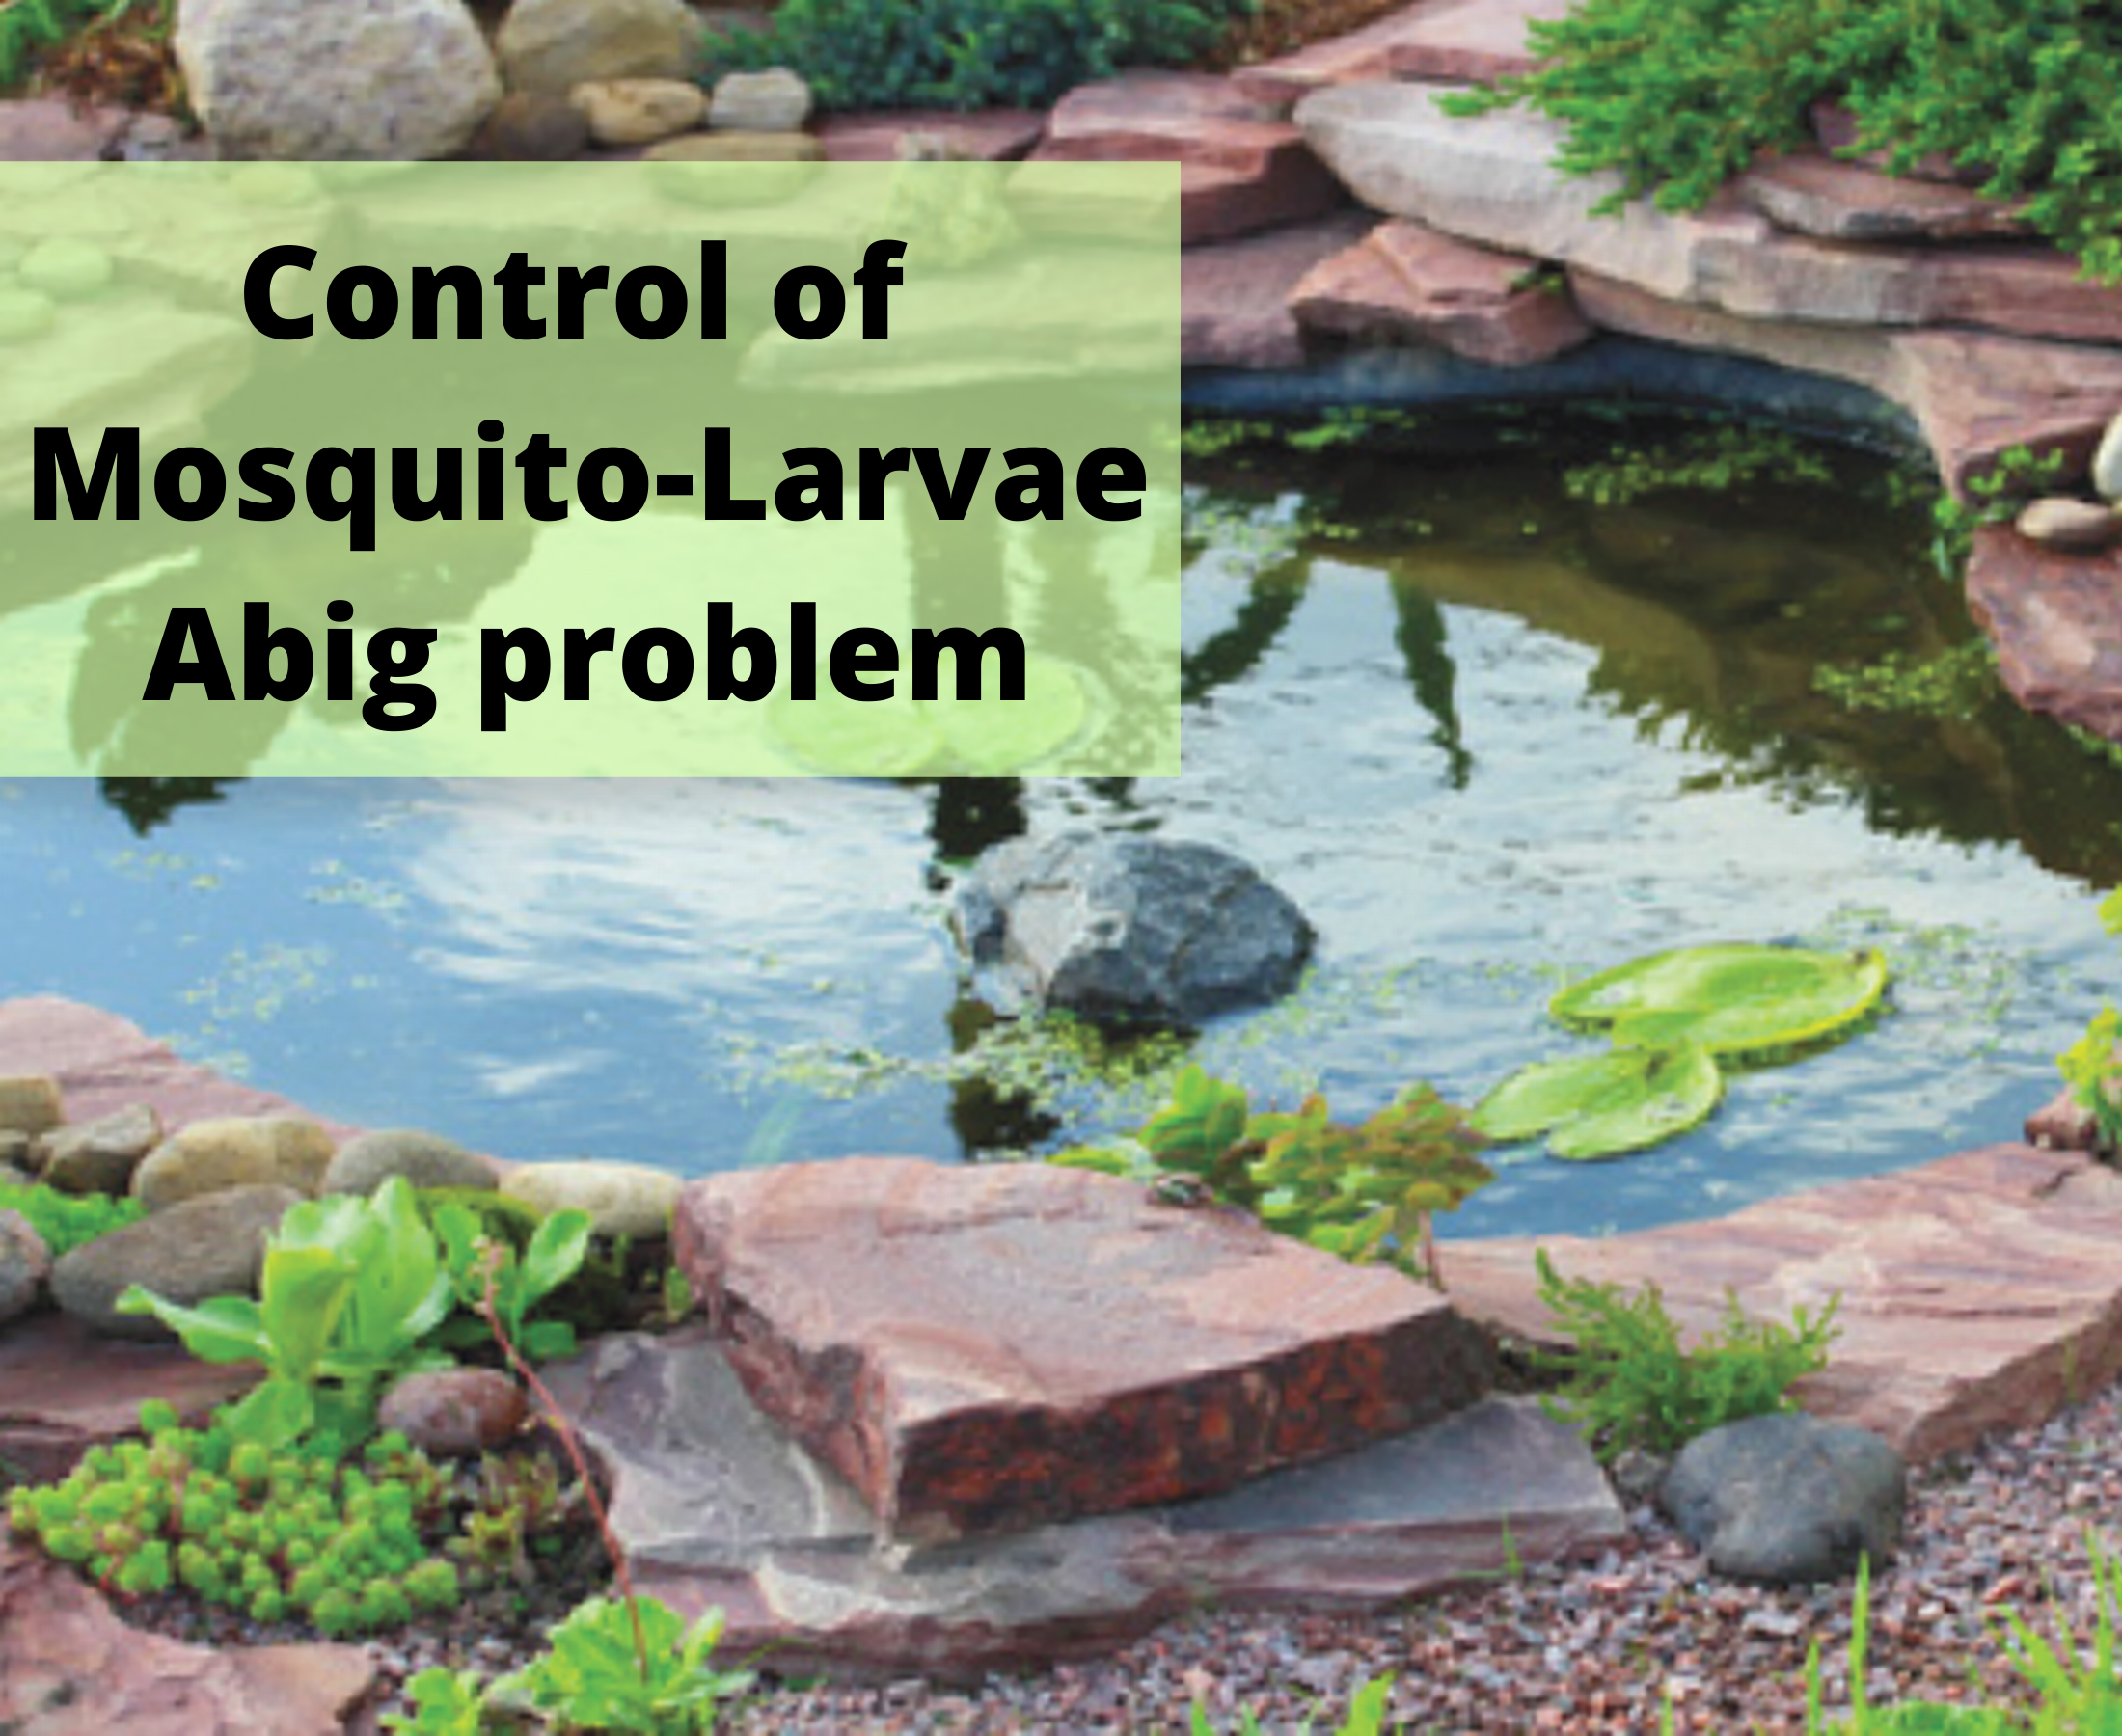 How to control mosquito larvae from pond without effect on plant and fish growth?